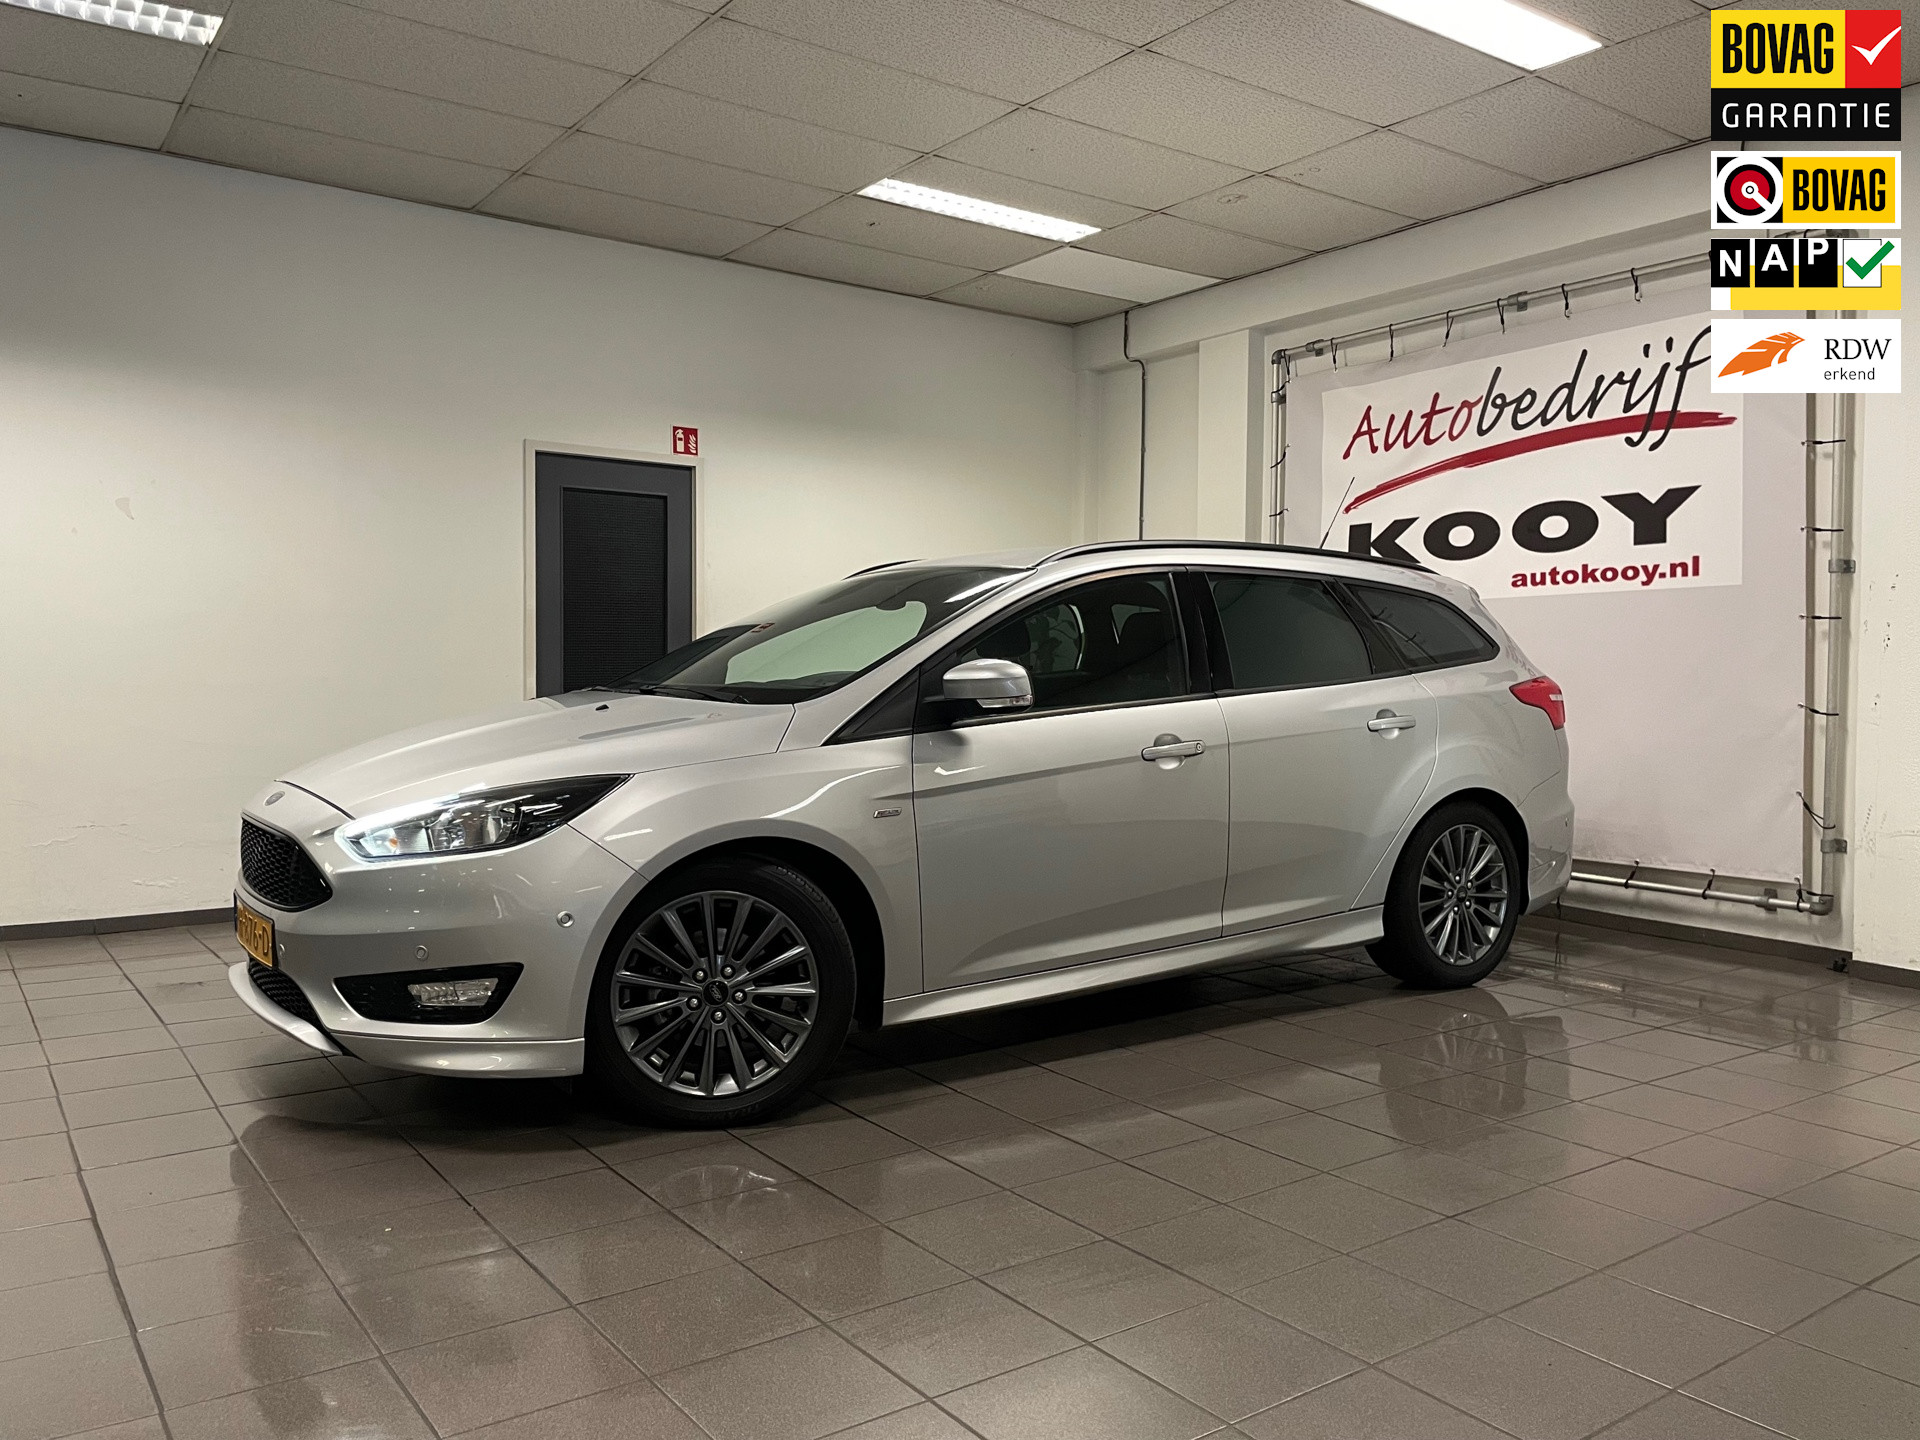 Ford Focus Wagon 1.0 ST-Line * LED / Navigatie / Cruise control *